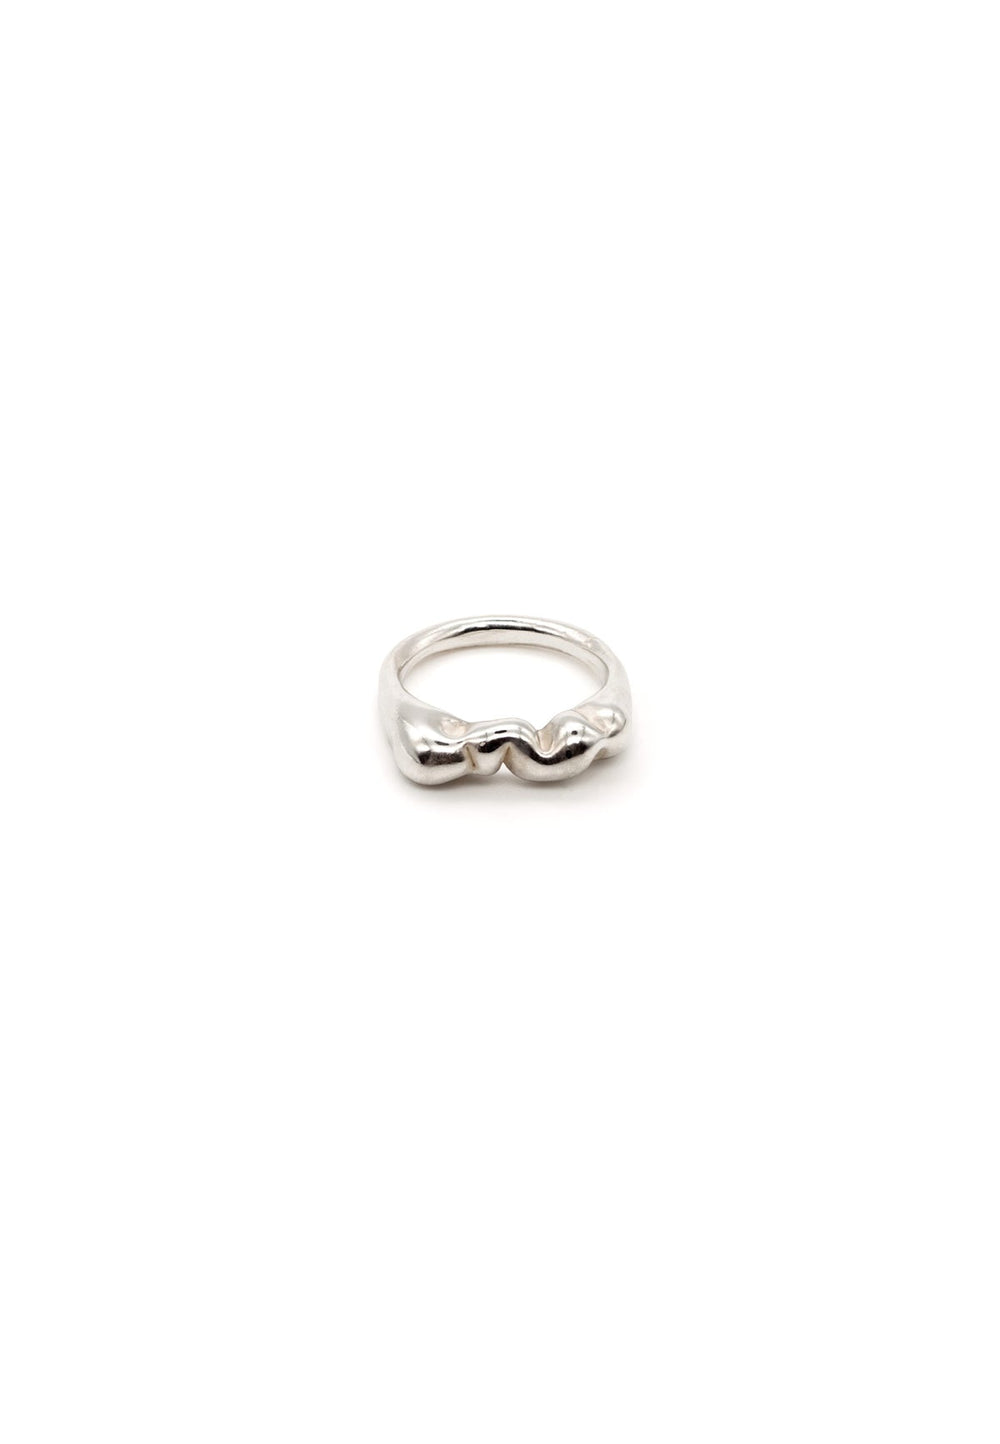 BLOBBY RING SILVER - Moeon